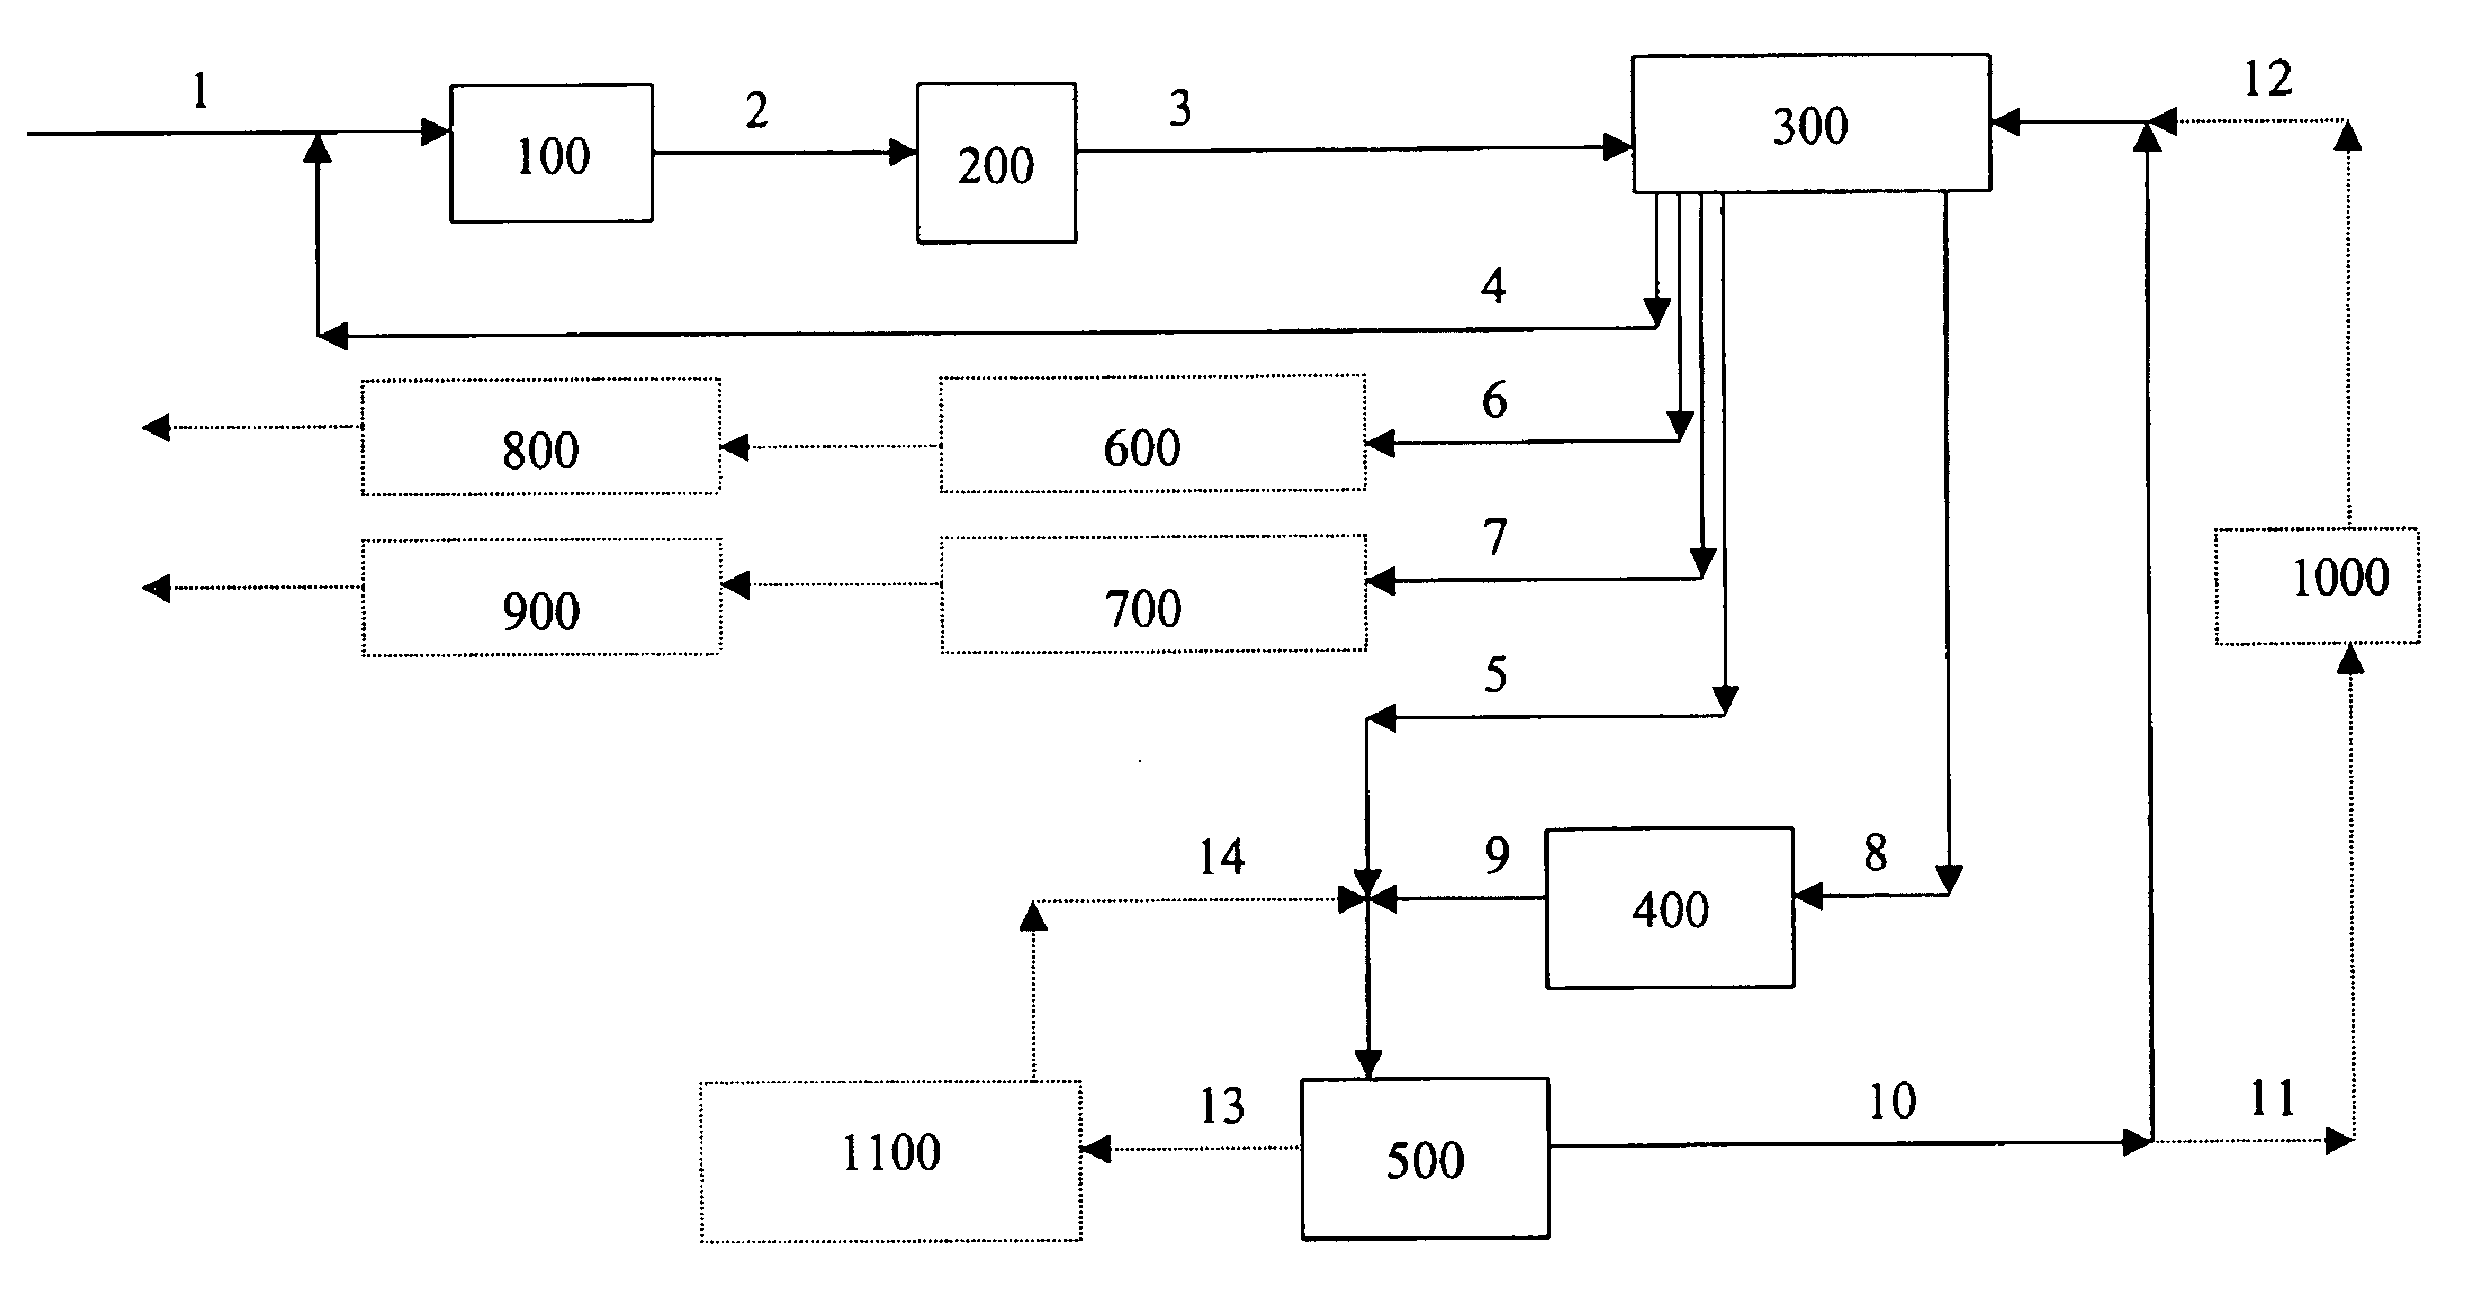 Conversion of syngas to distillate fuels